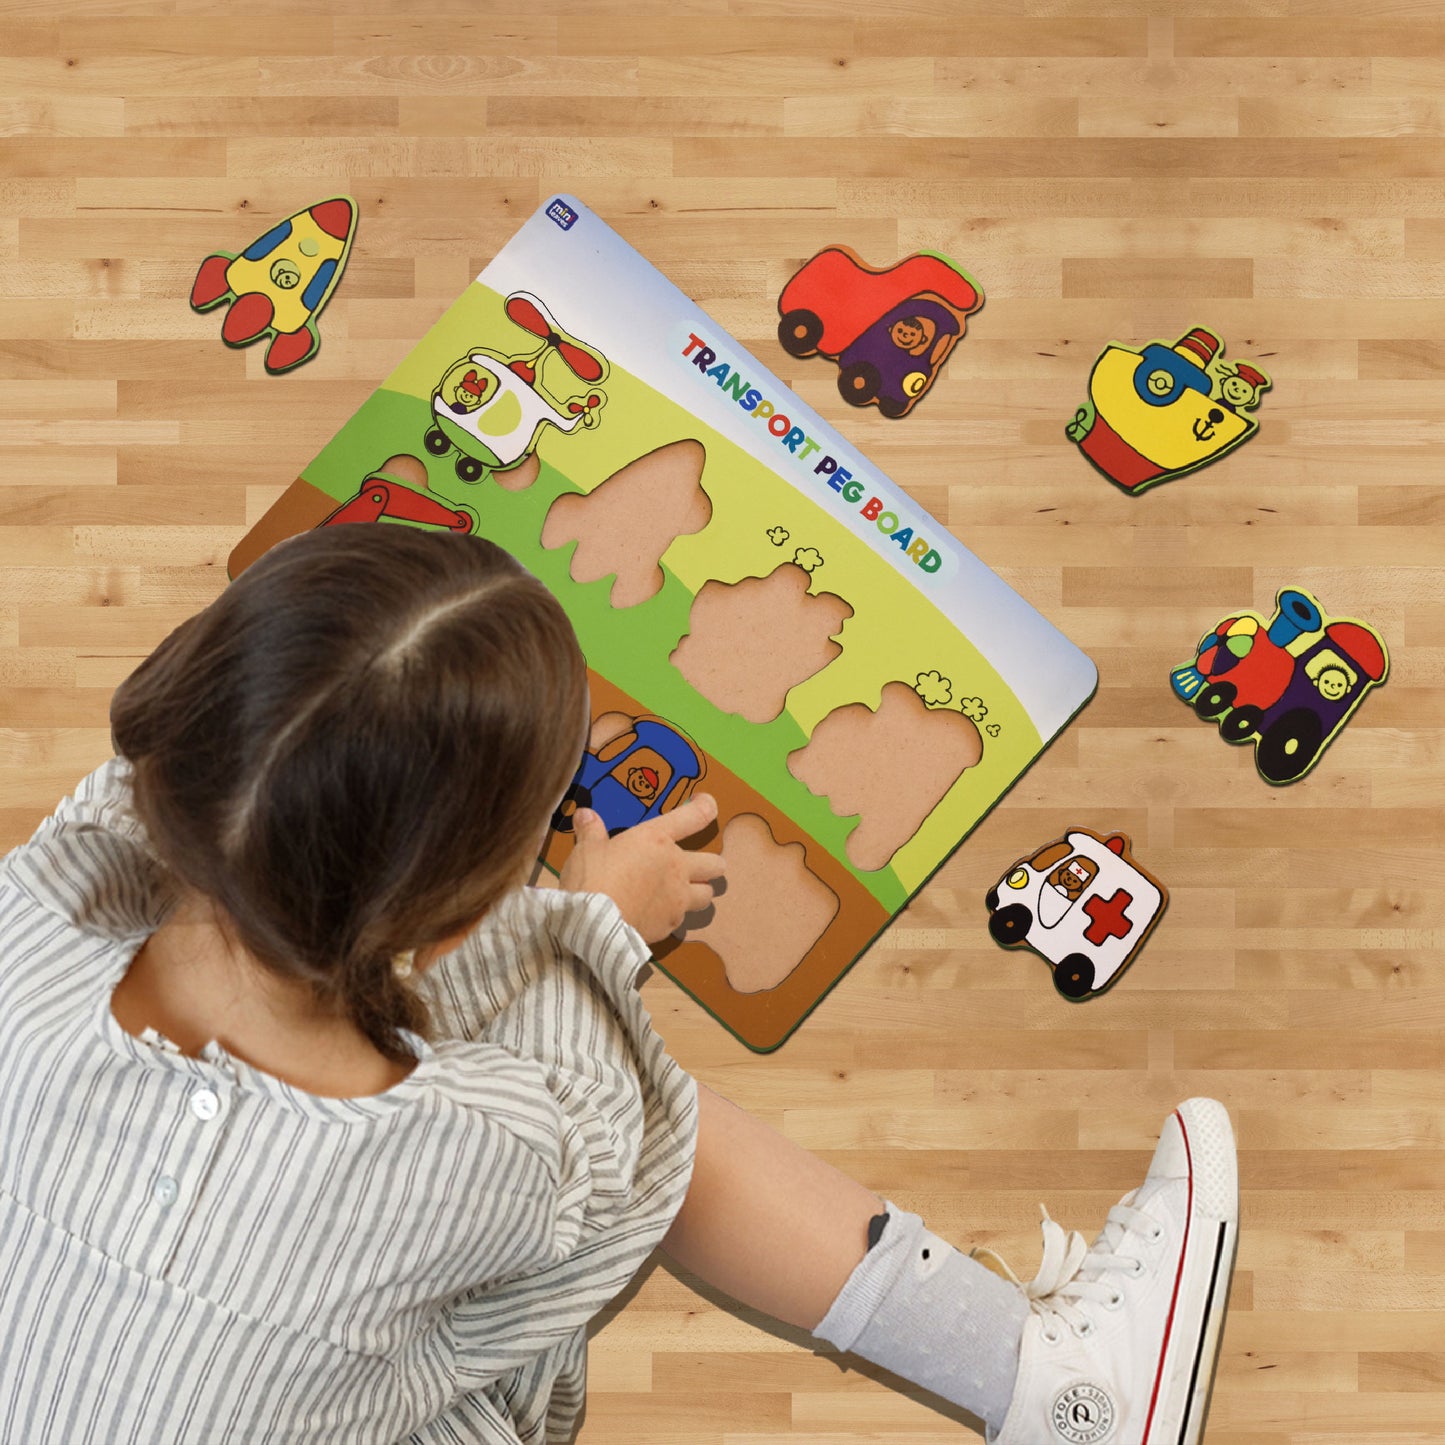 Wooden Transport Peg Board Puzzle